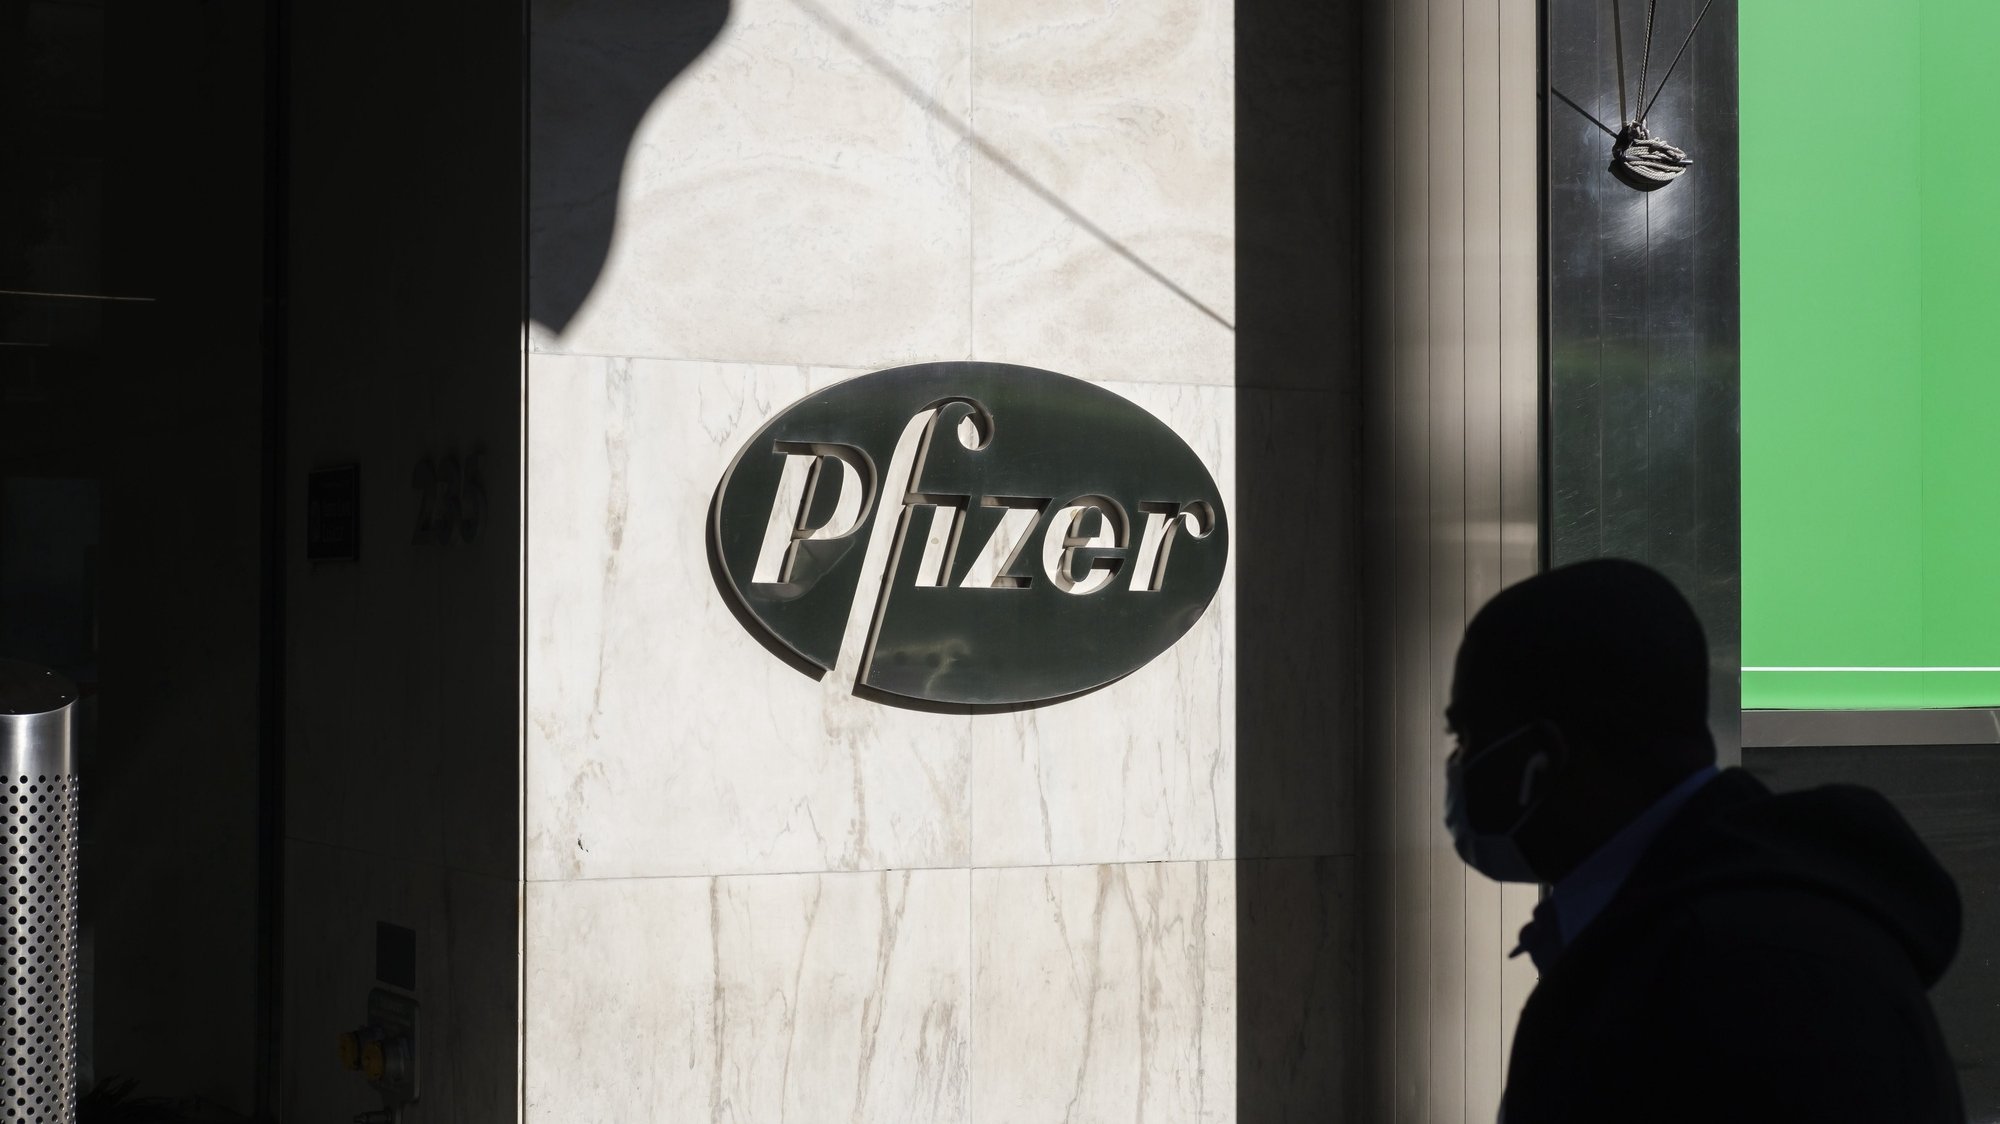 epa08810220 A person walks past the headquarters of the pharmaceutical company Pfizer in New York, New York, USA, 09 November 2020. Pfizer announced earlier on the same day that a coronavirus vaccine it was developing with the German drugmaker BioNTech was showing a 90 percent effectiveness in preventing COVID-19 earlier trials.  EPA/JUSTIN LANE